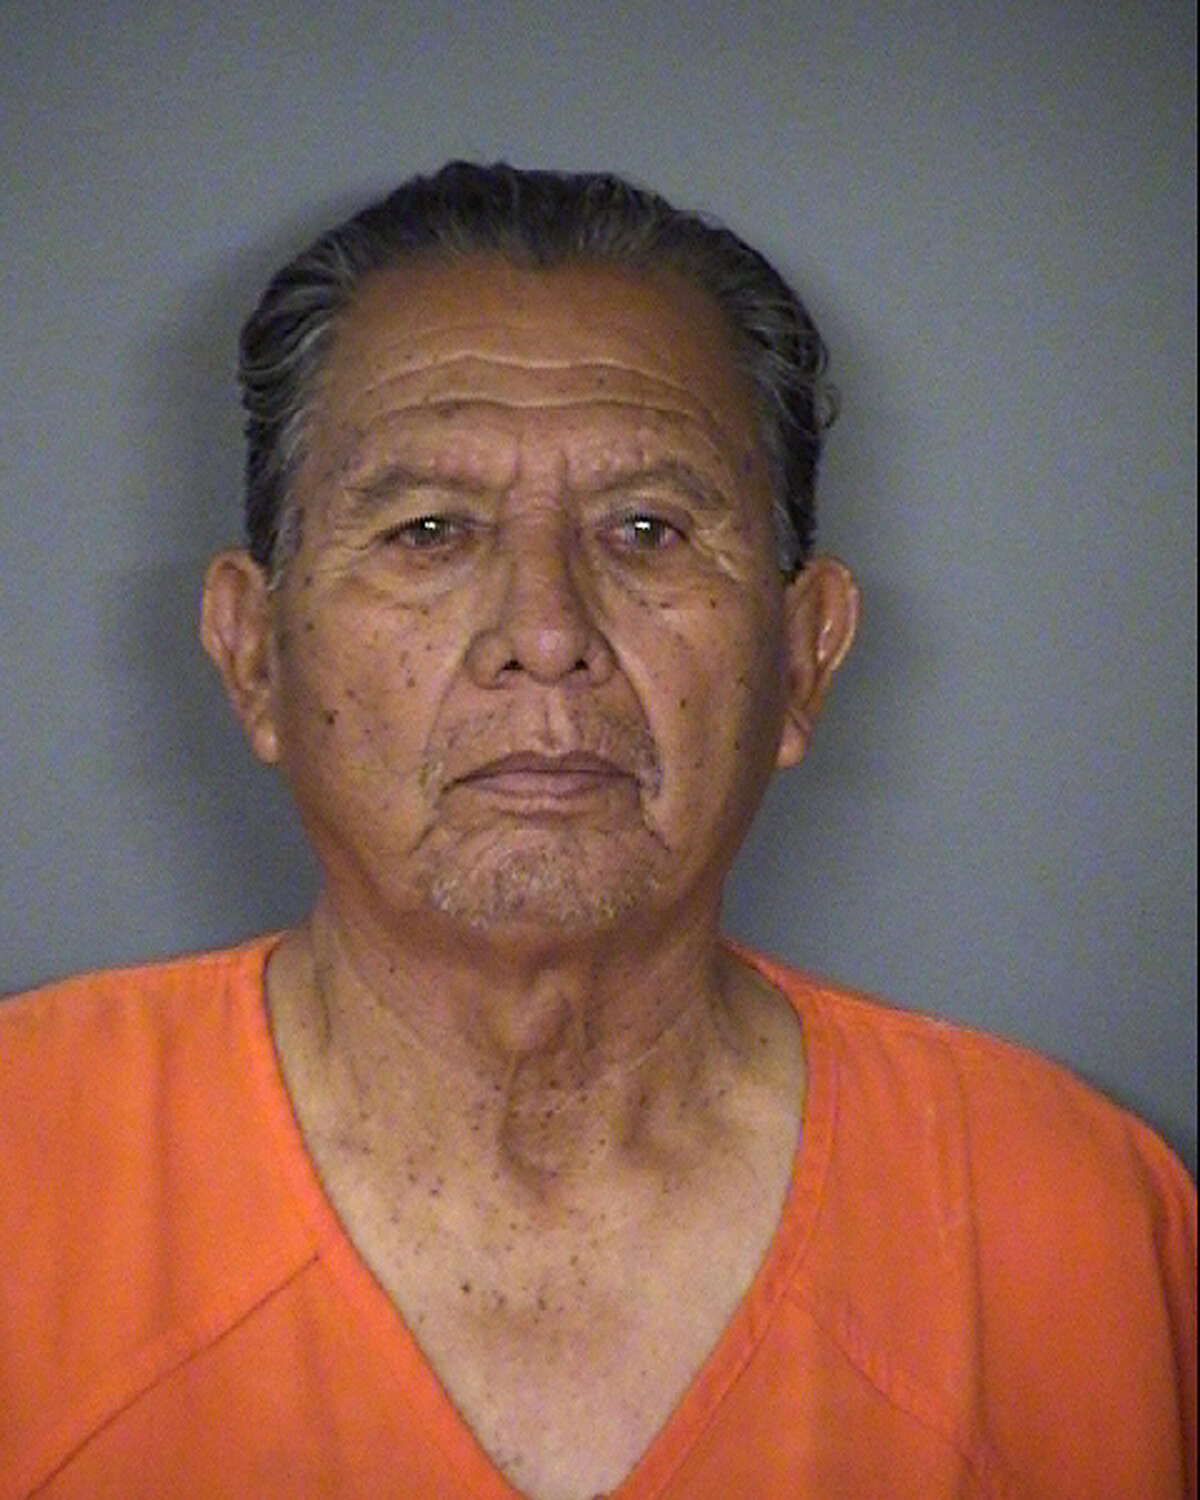 Pron Mom San Rep Sex Vedio Com - 75-year-old man accused of brutally raping young girl for more than a decade